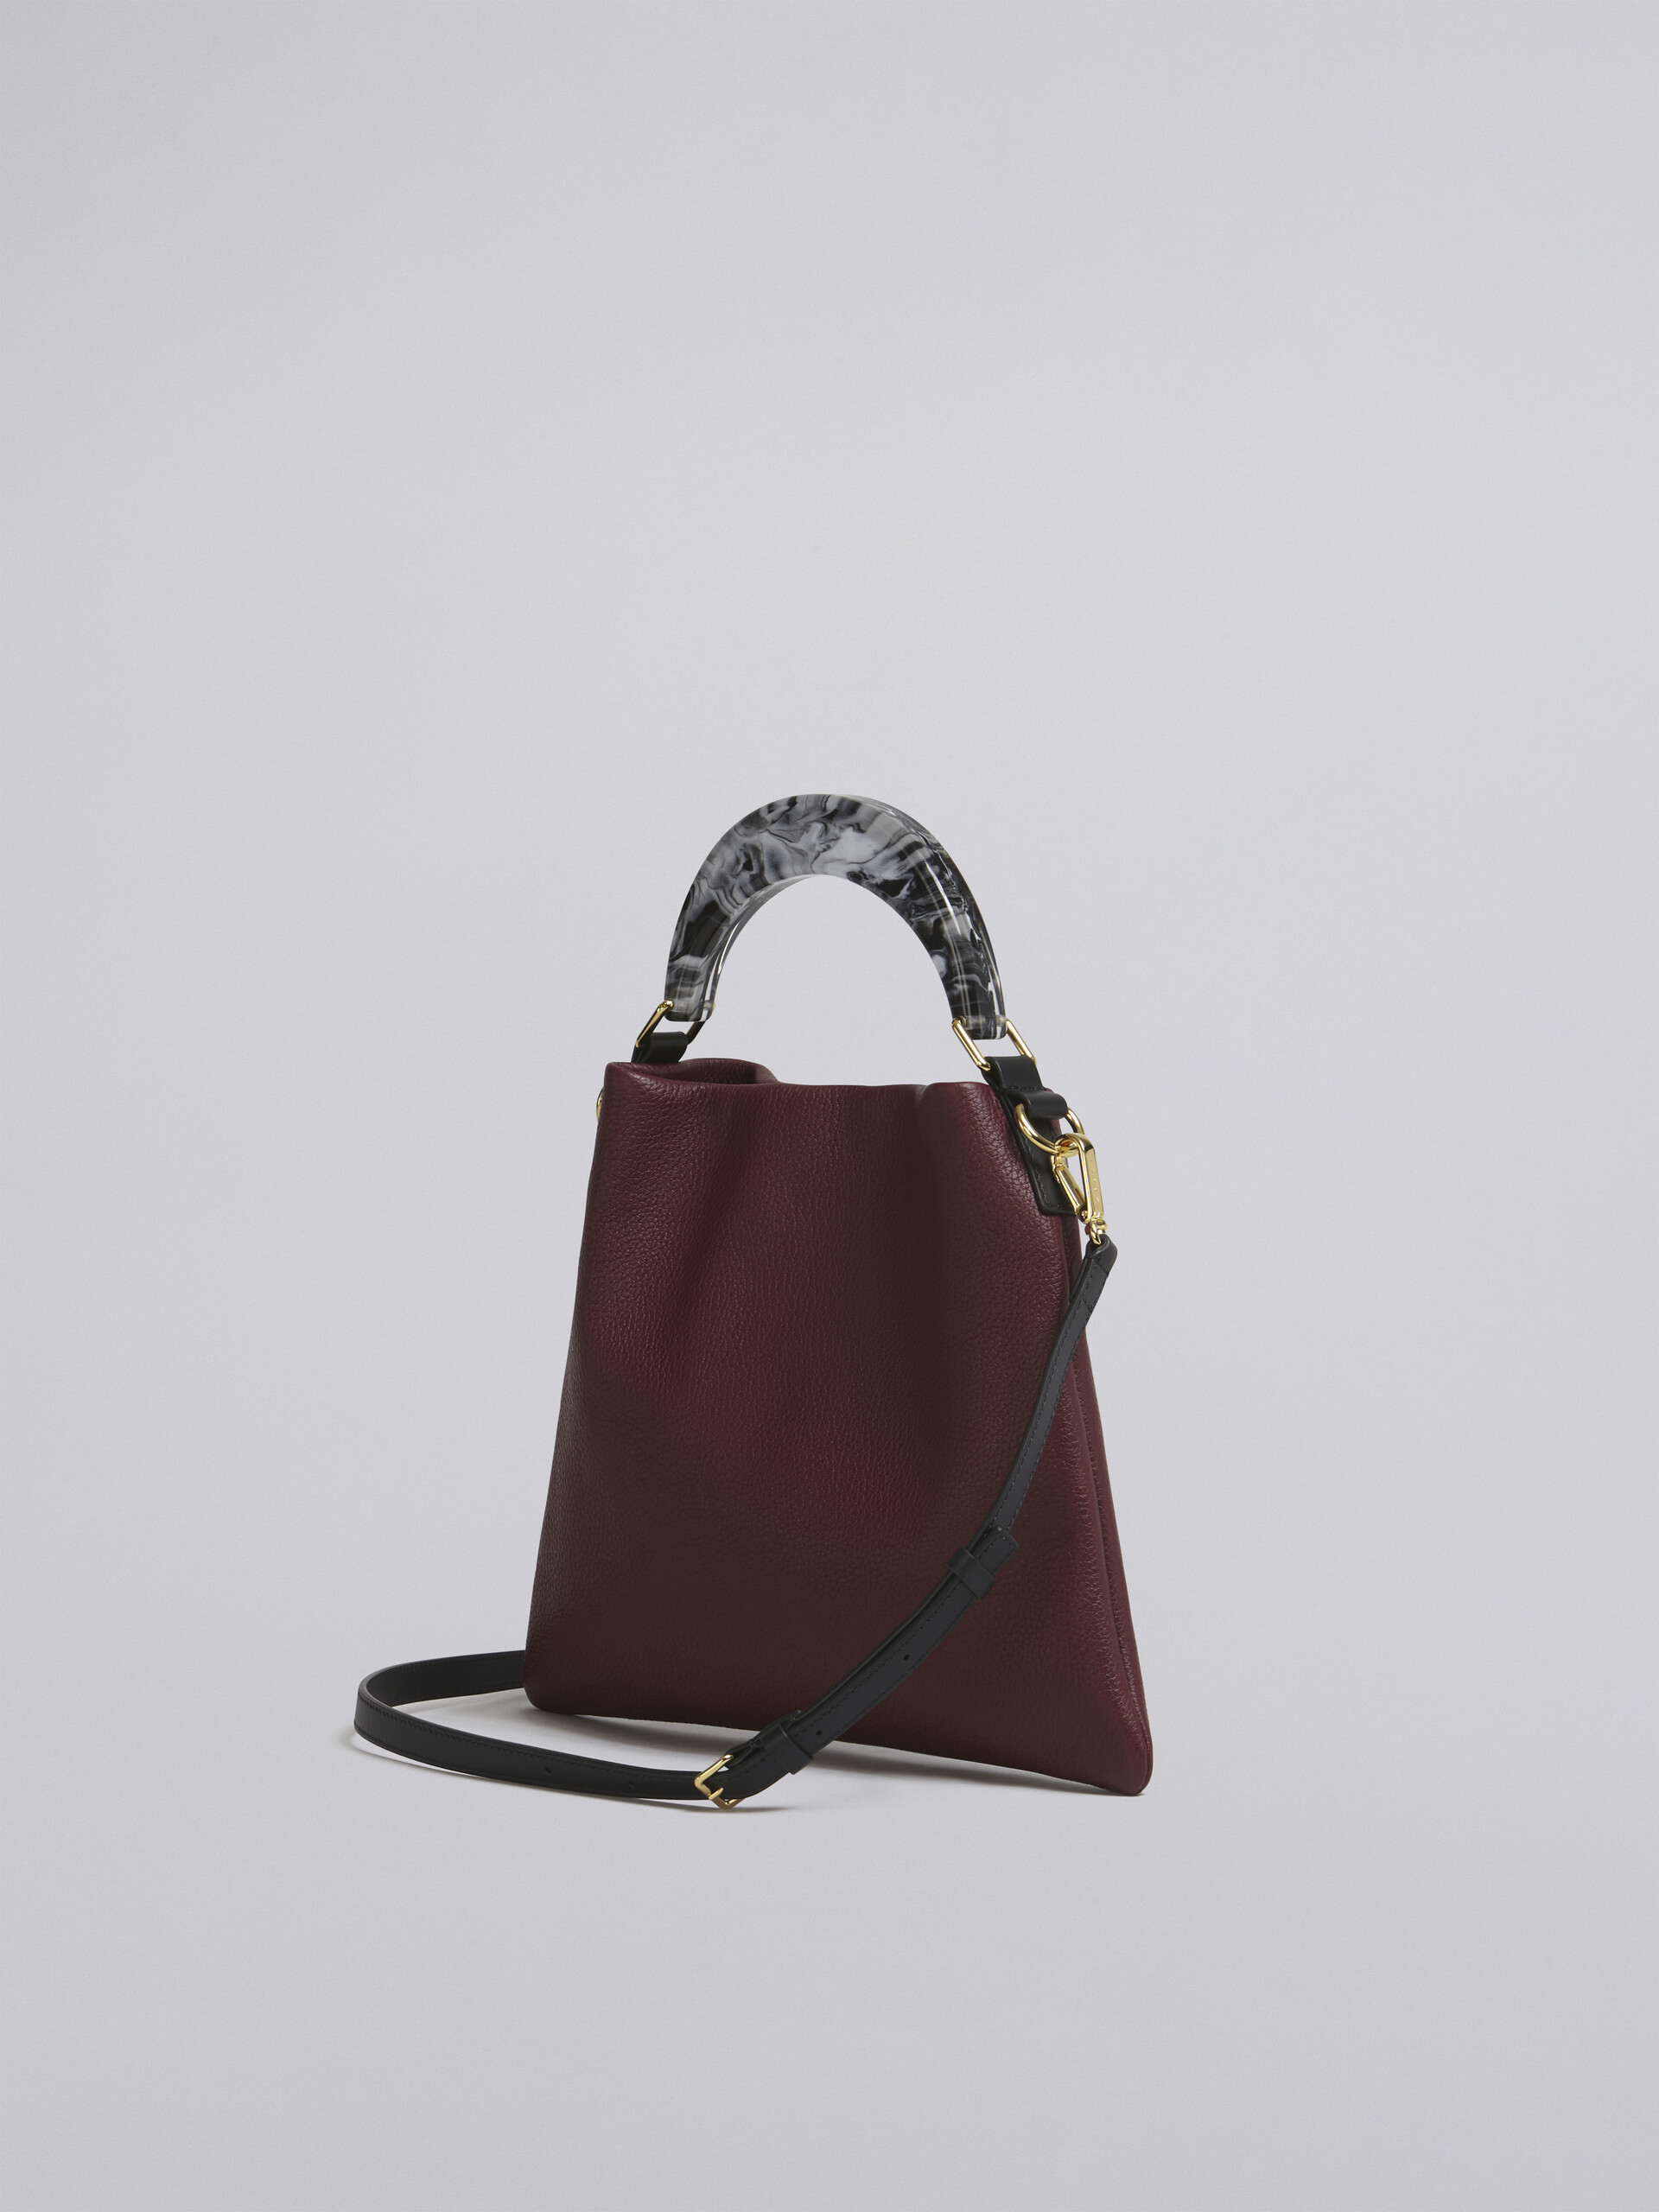 HOBO bag in red grained calfskin and resin handle - Shoulder Bags - Image 2